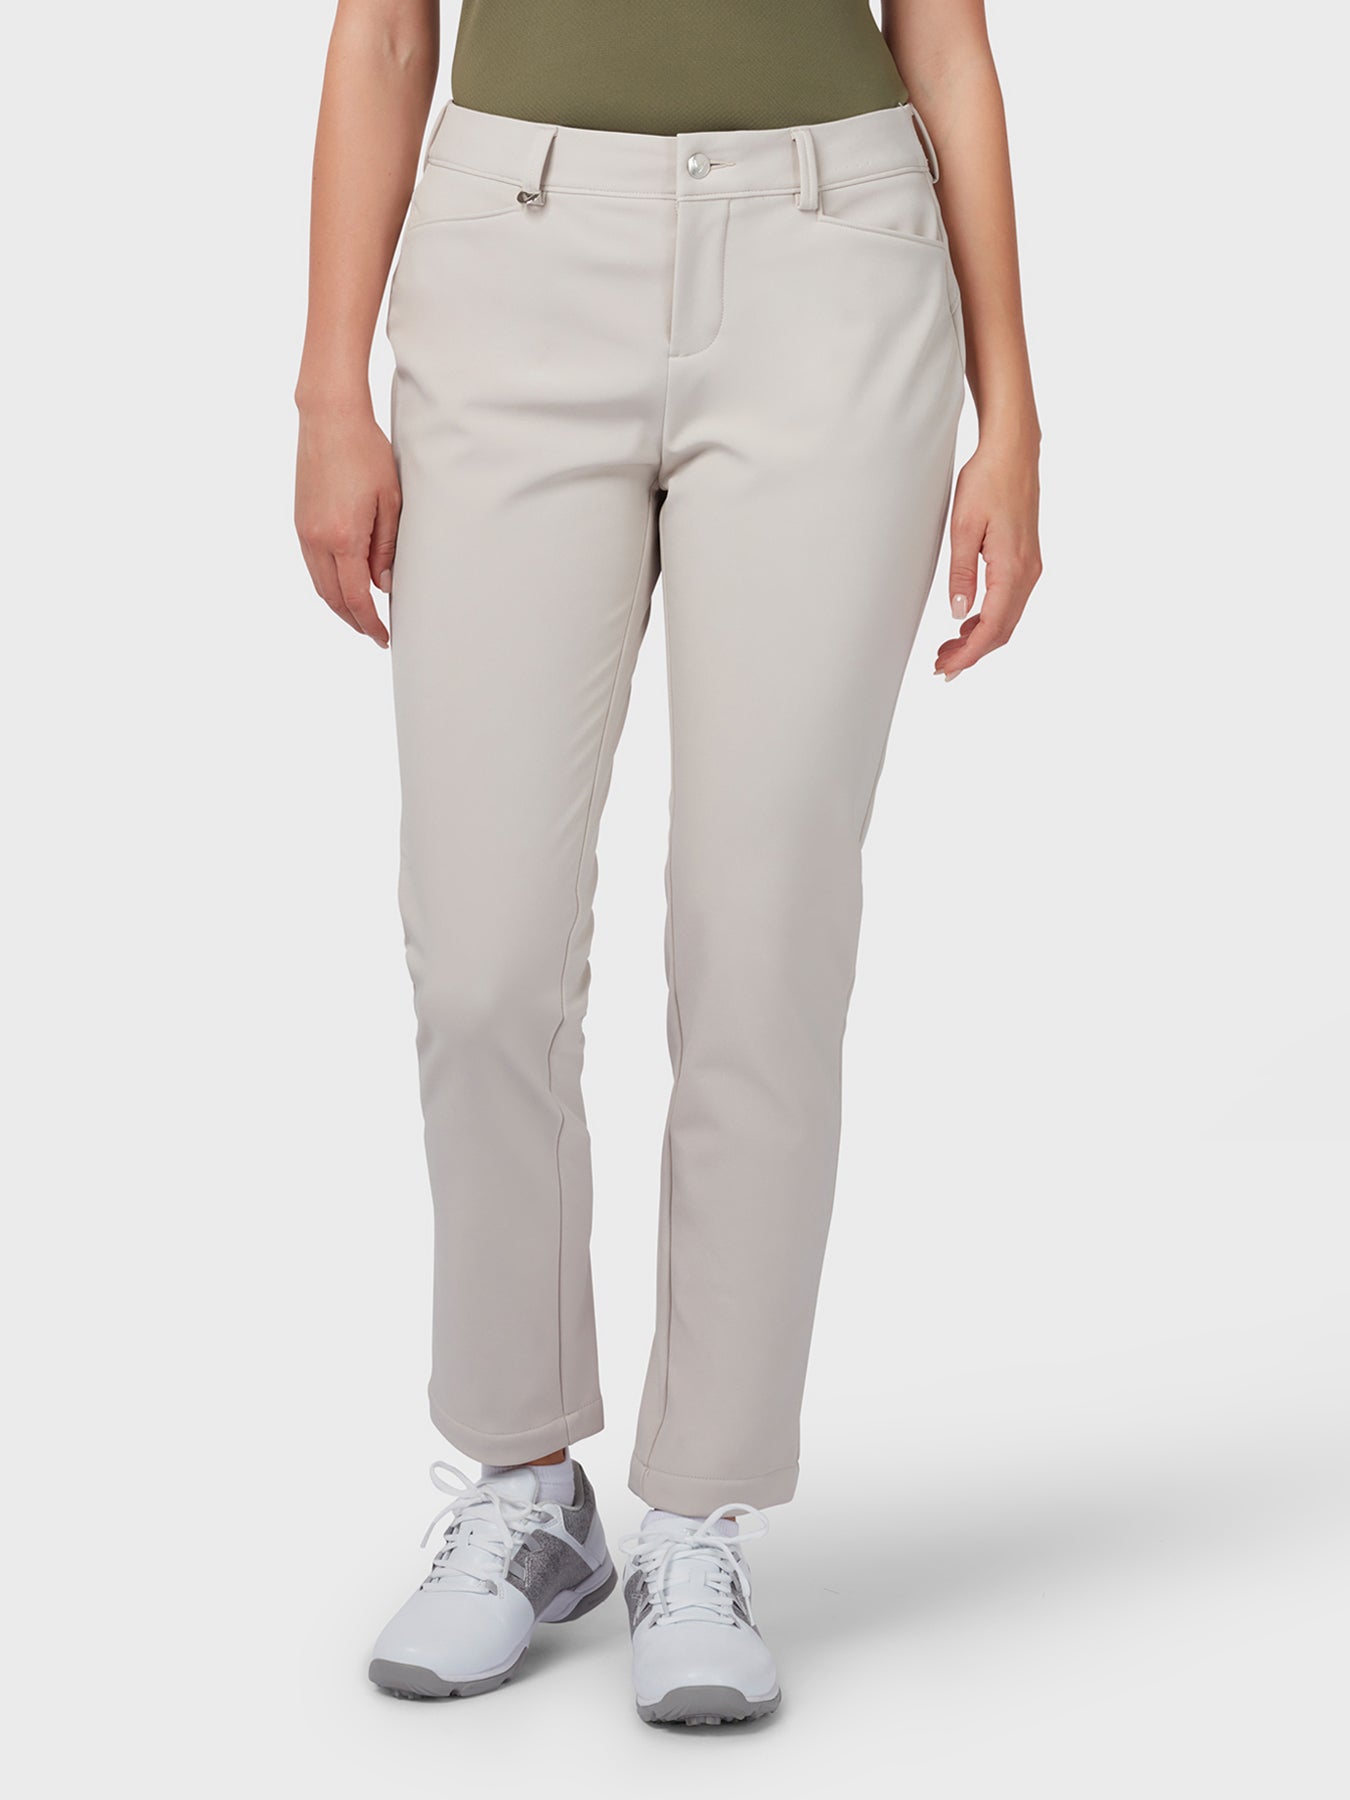 View Womens Thermal Trouser In Chateau Grey Chateau Grey 2 29 information